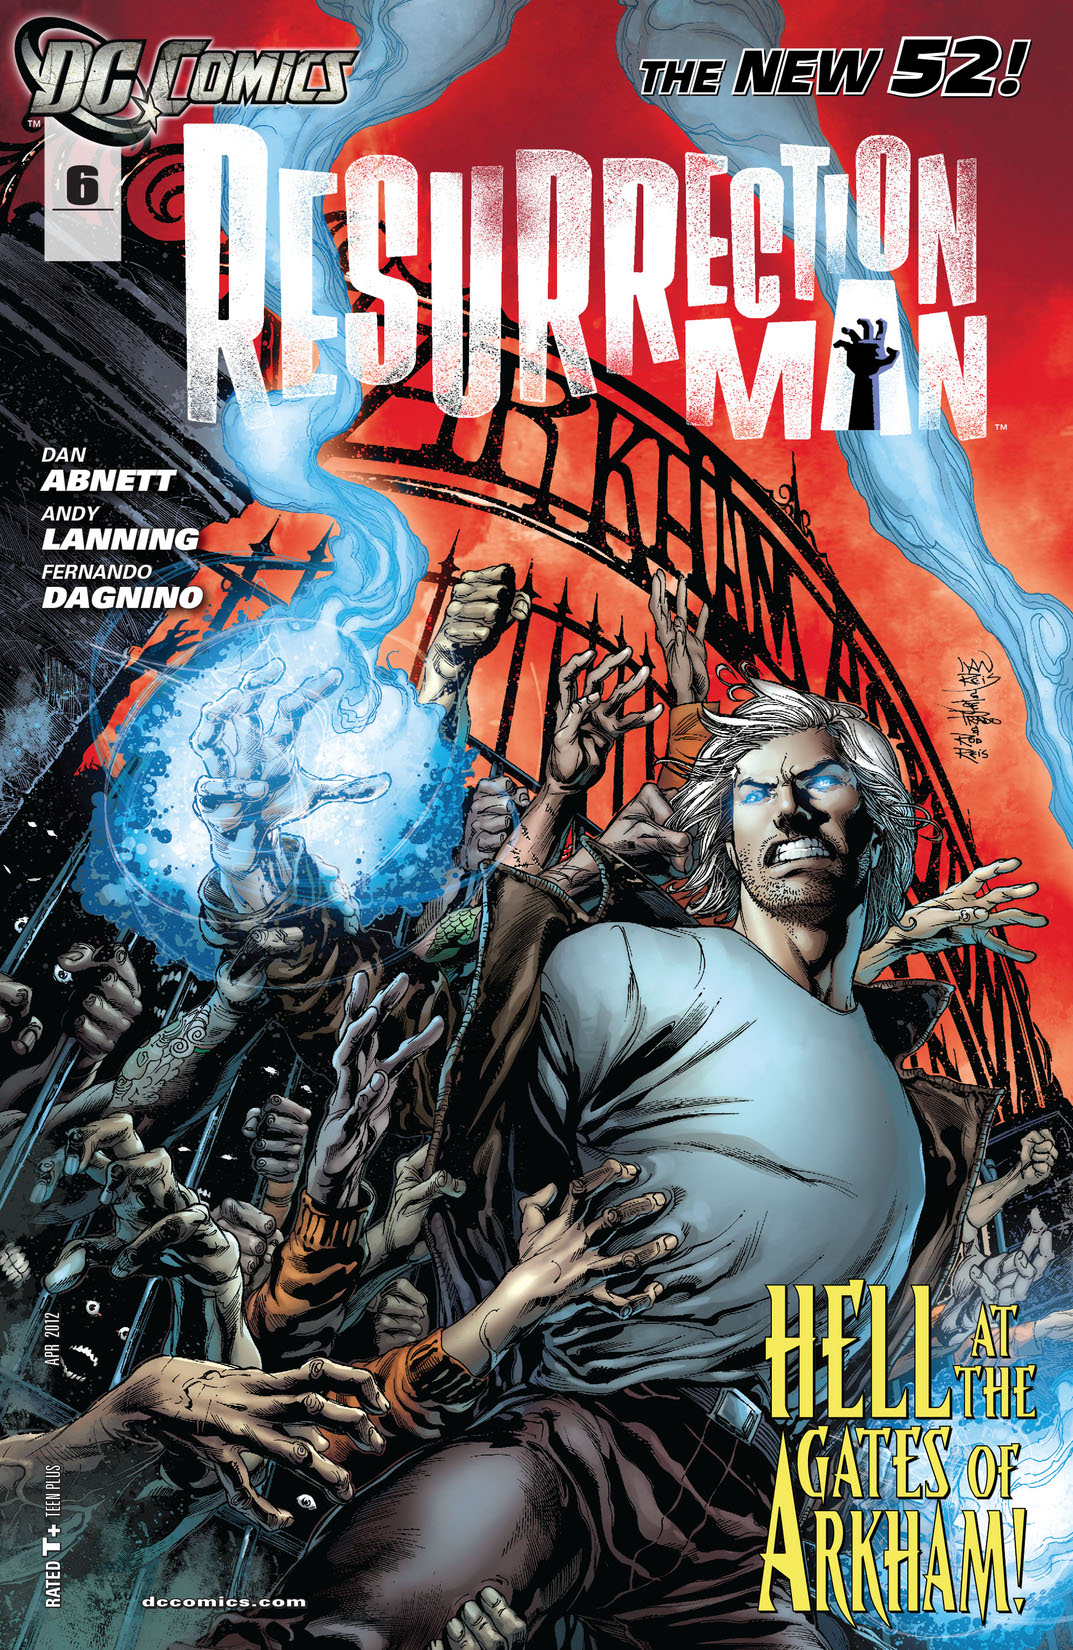 Resurrection Man (2011-) #6 preview images